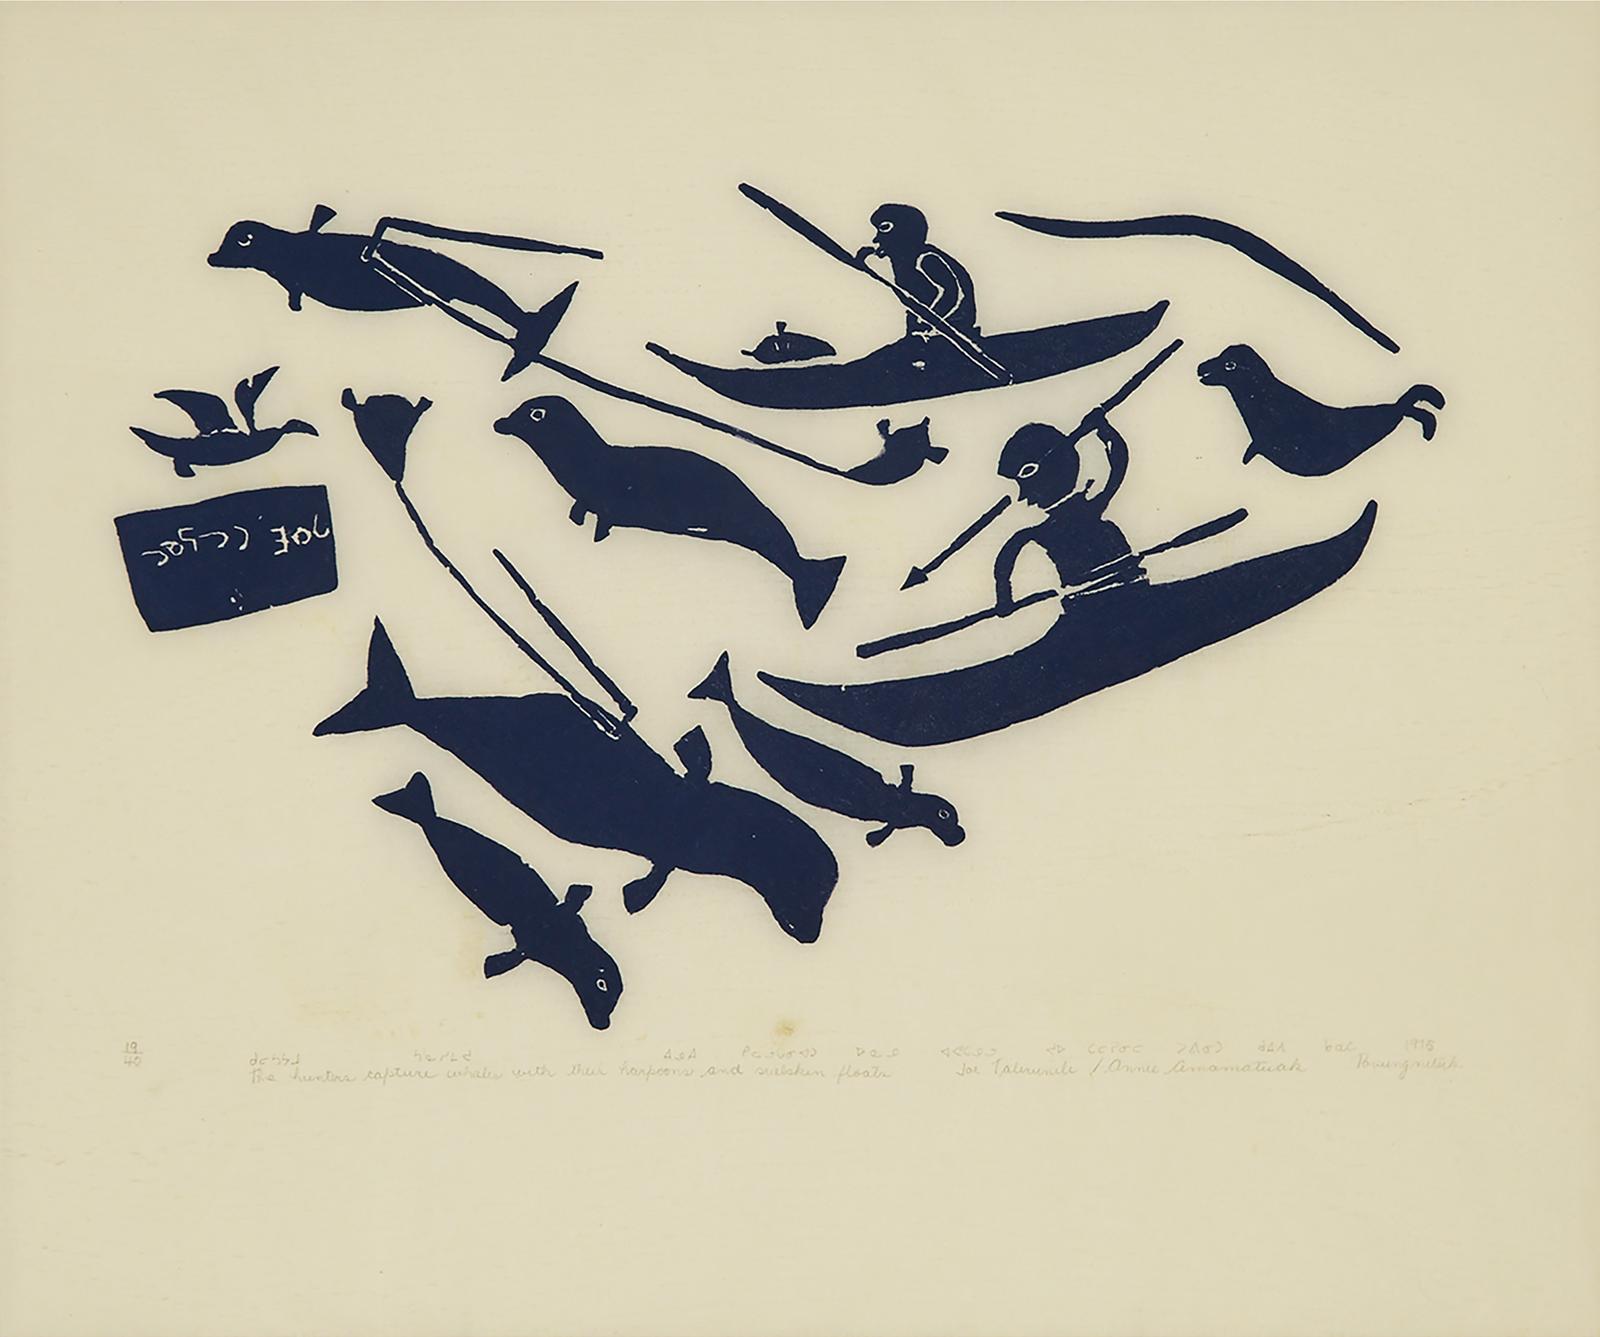 Joe Talirunili (1893-1976) - The Hunters Capture Whales With Their Harpoons And Sealskin Floats